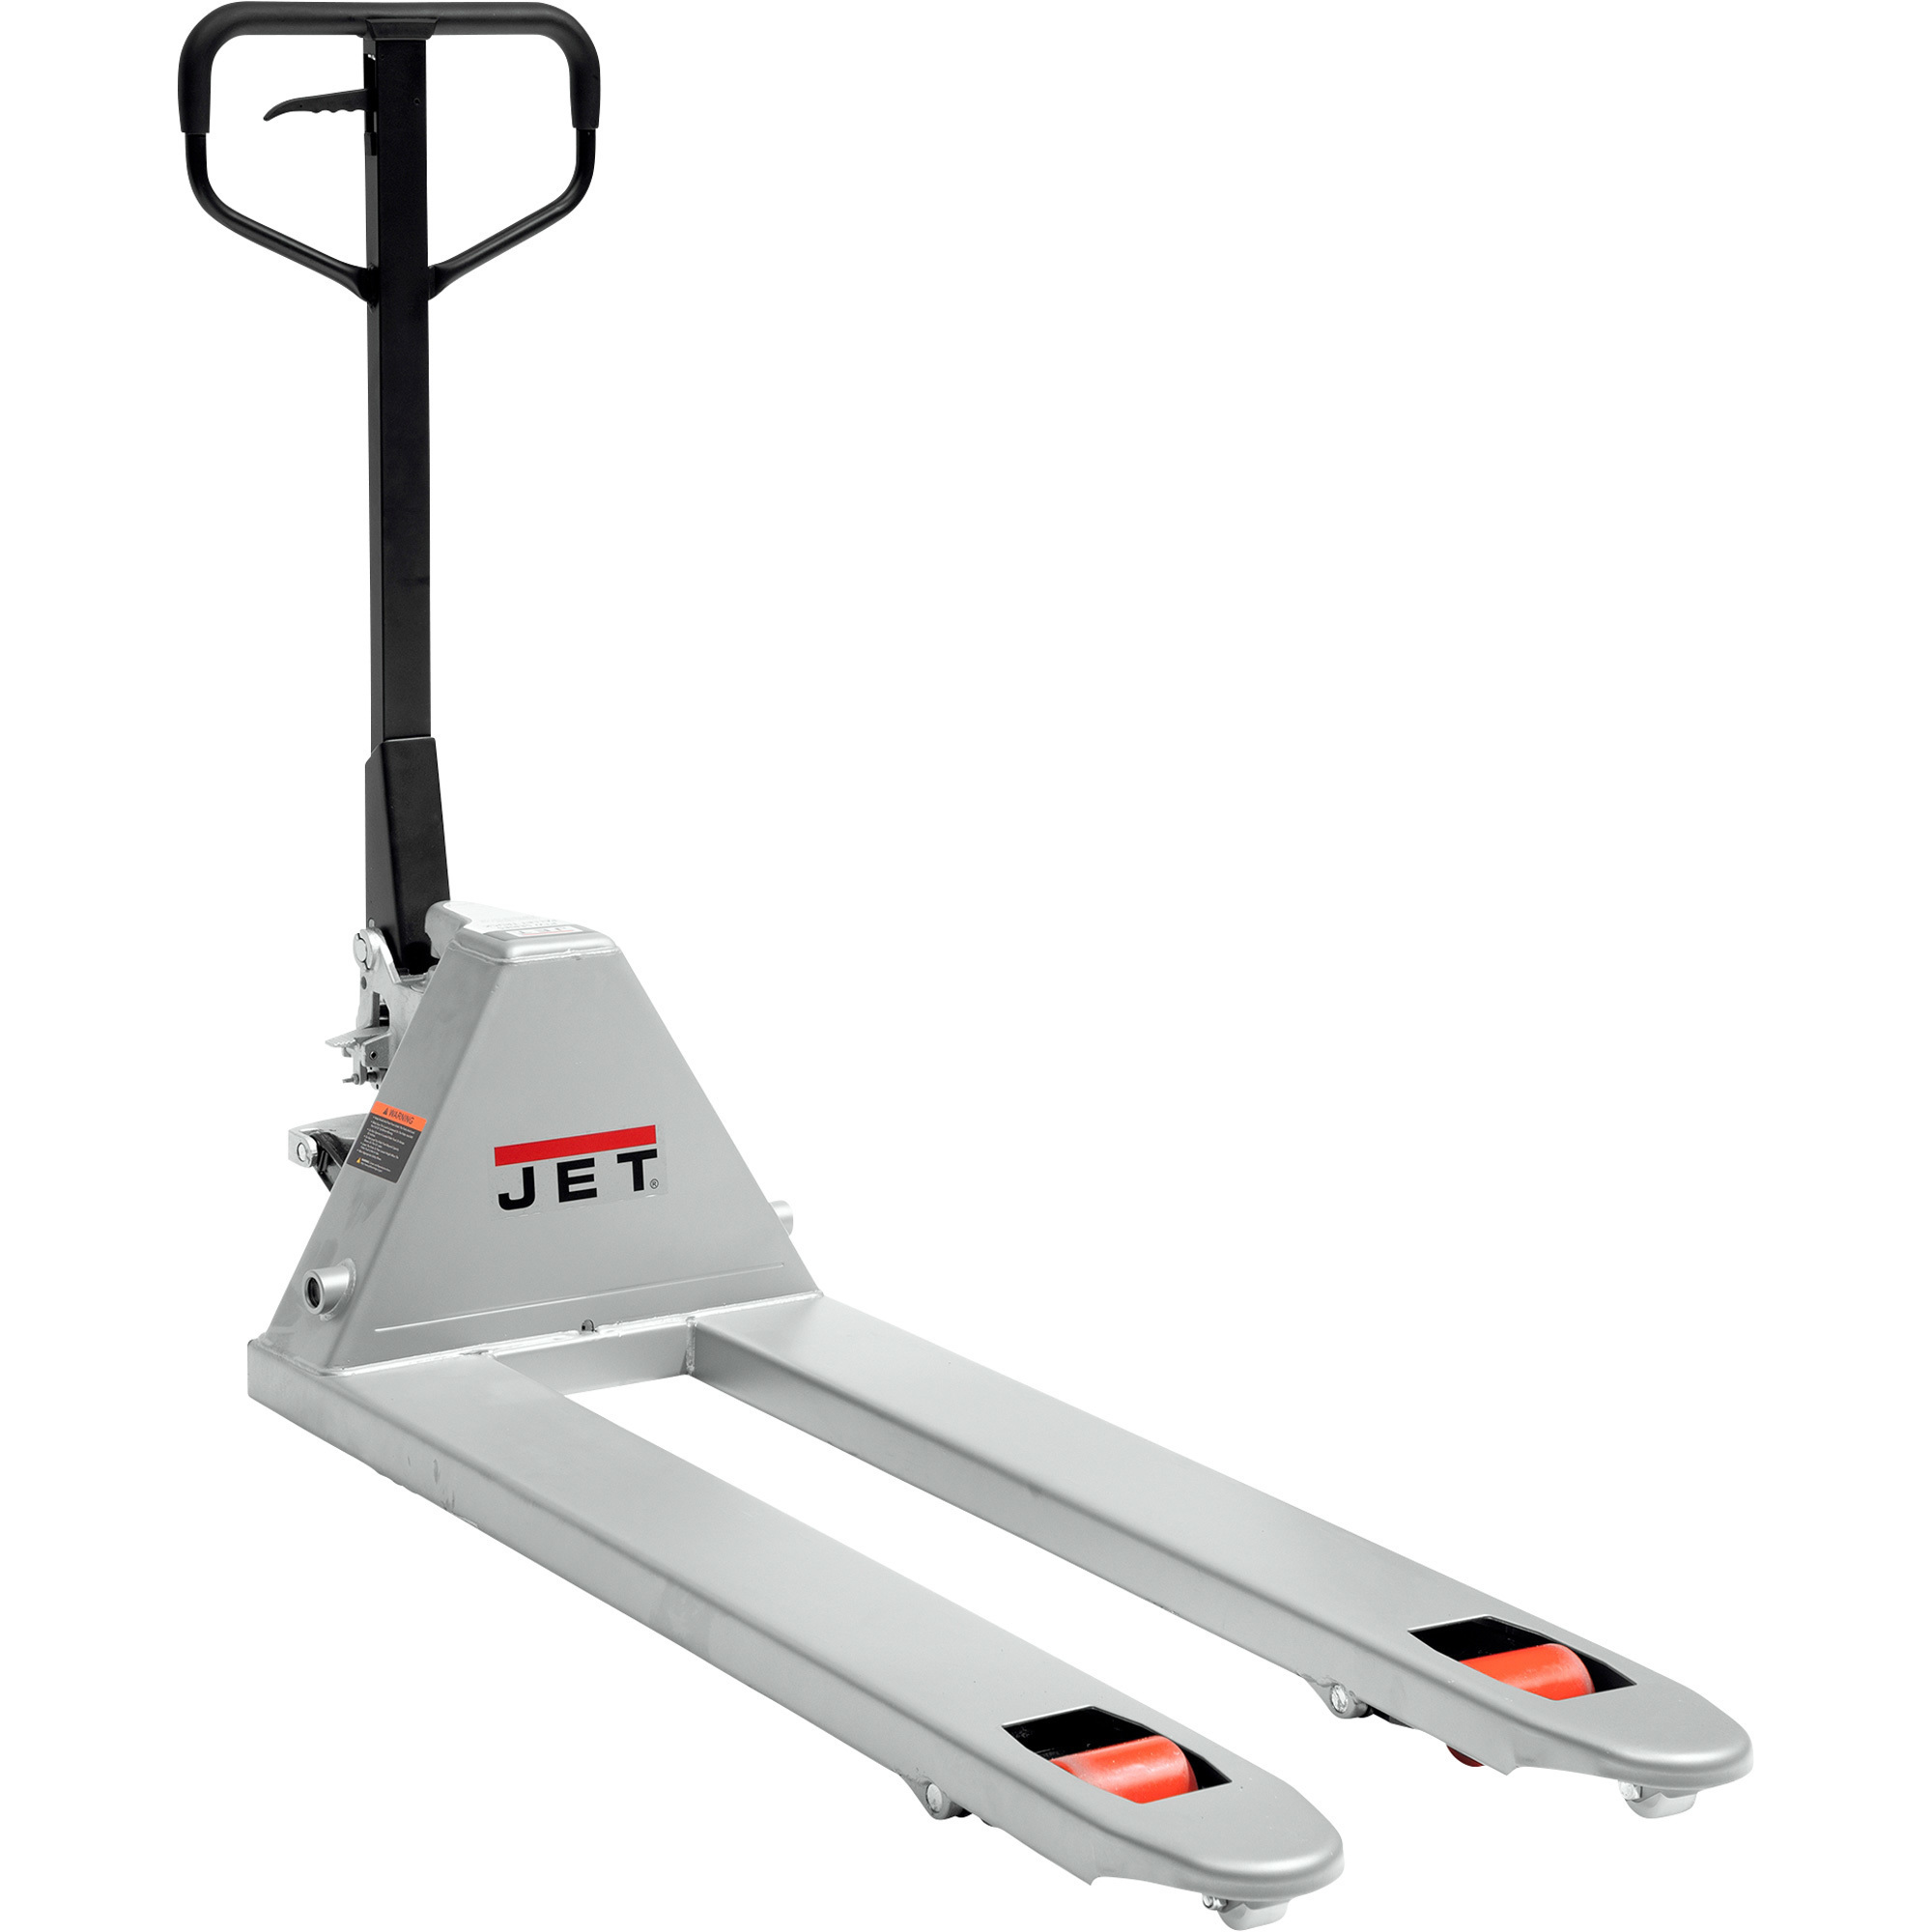 JET PTW Series Pallet Truck, 6600-Lb. Capacity, 63Inch x 20.5Inch x 48Inch, Model PTW-2048A